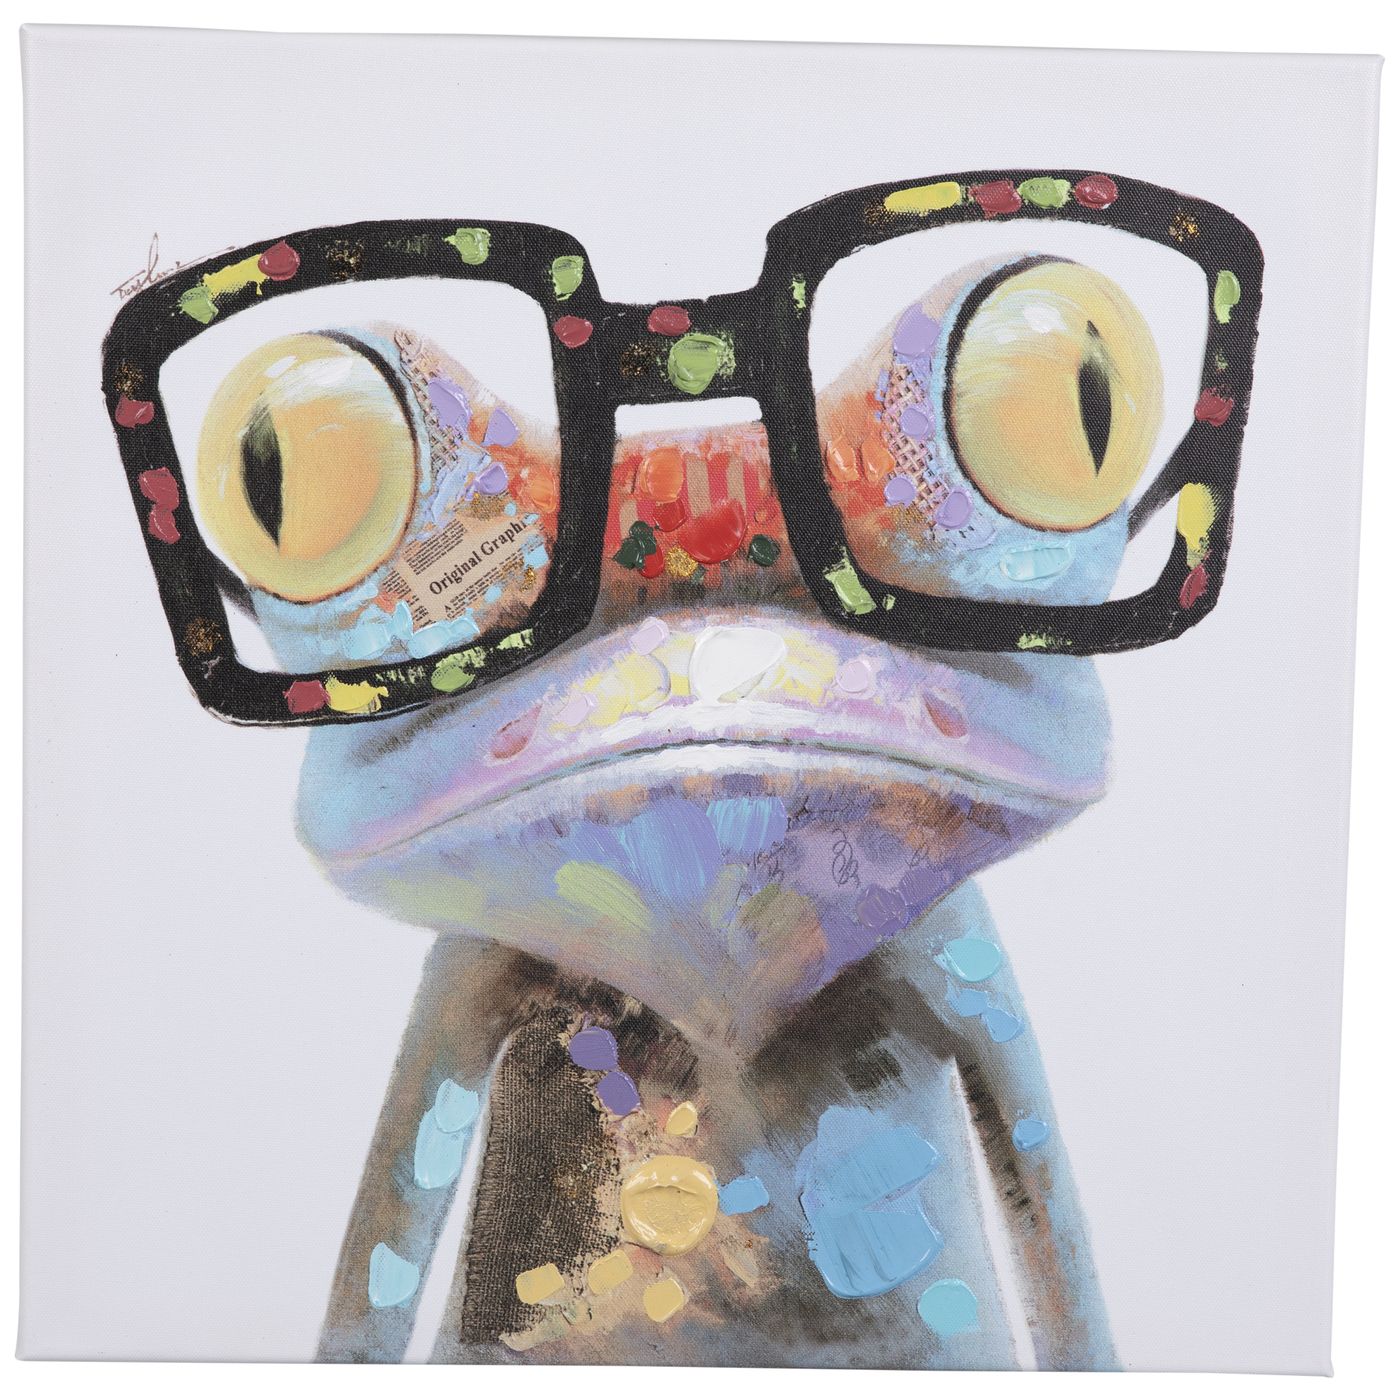 Frog With Glasses Canvas Wall Decor | Hobby Lobby | 1964279 With Regard To Most Popular Frog Wall Art (View 11 of 20)